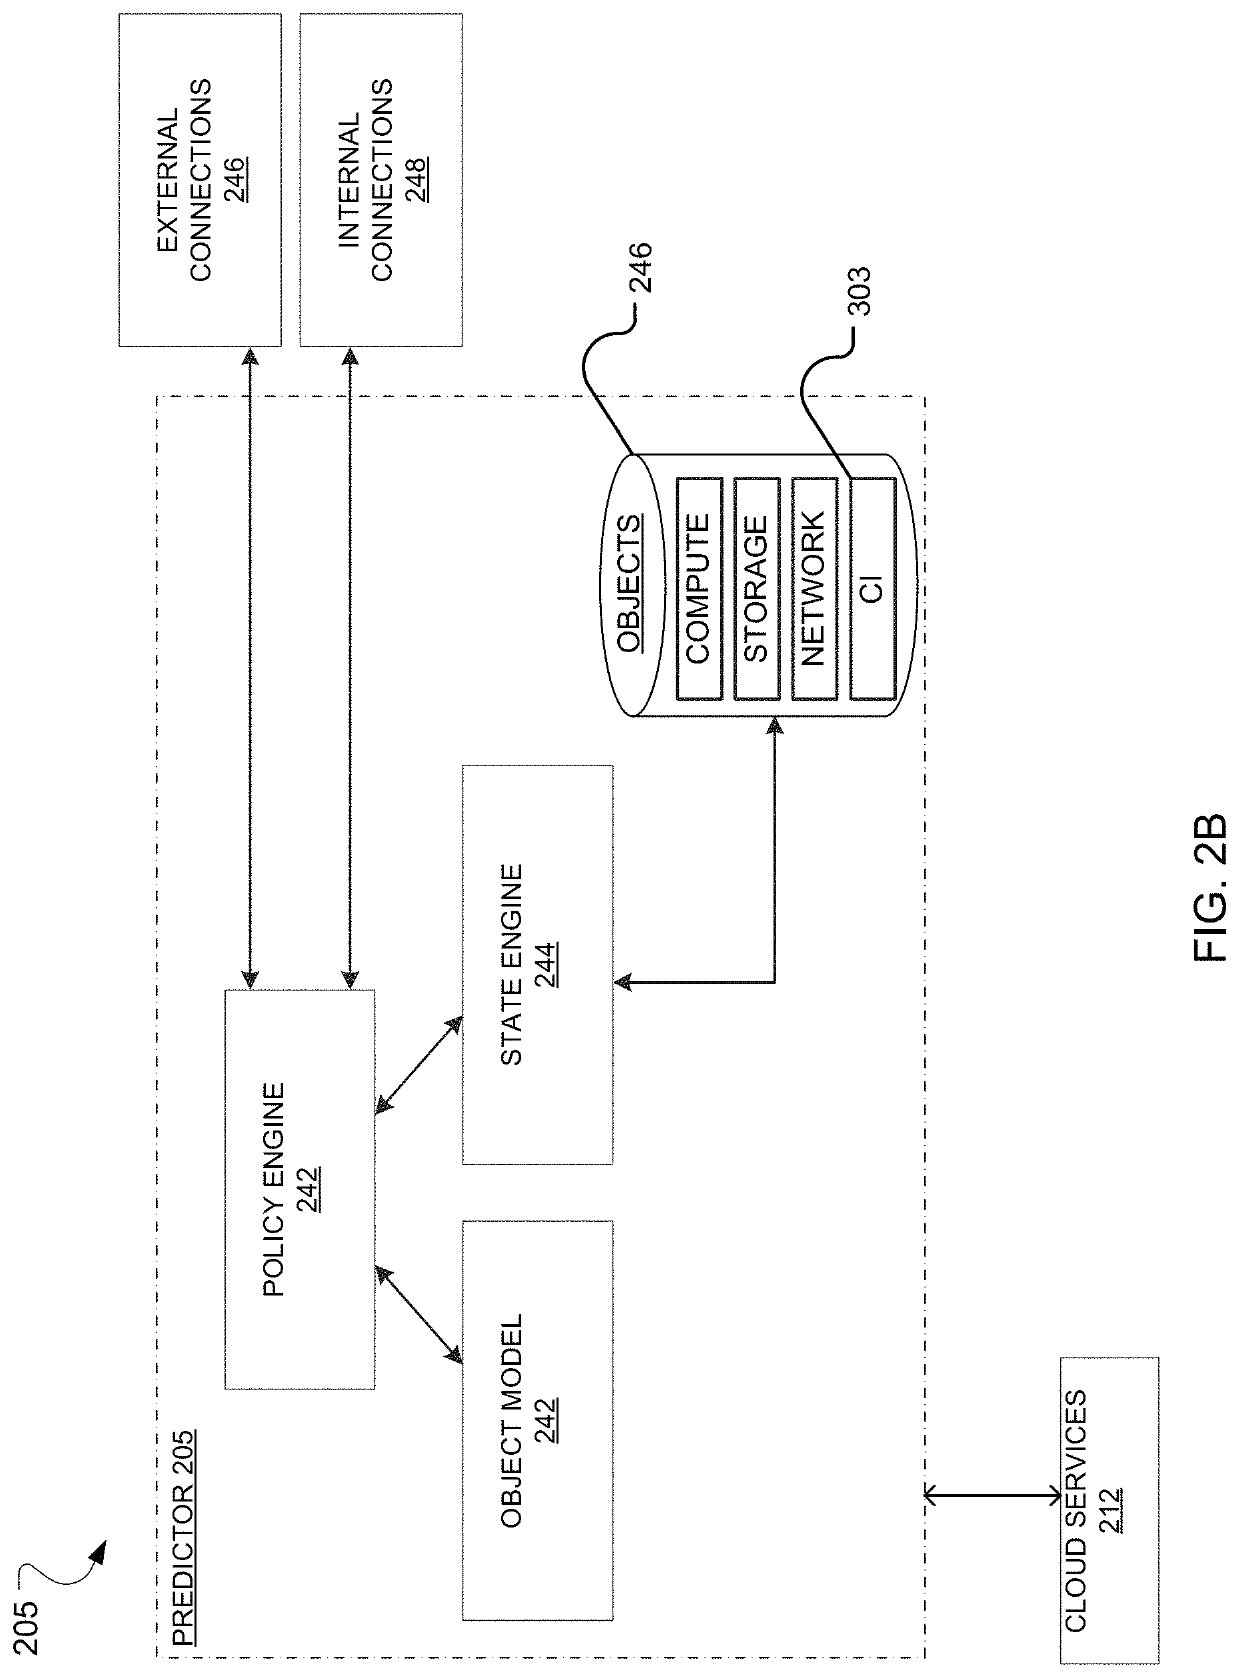 Systems and methods of predictive display of cloud offerings based on real-time infrastructure data configurations